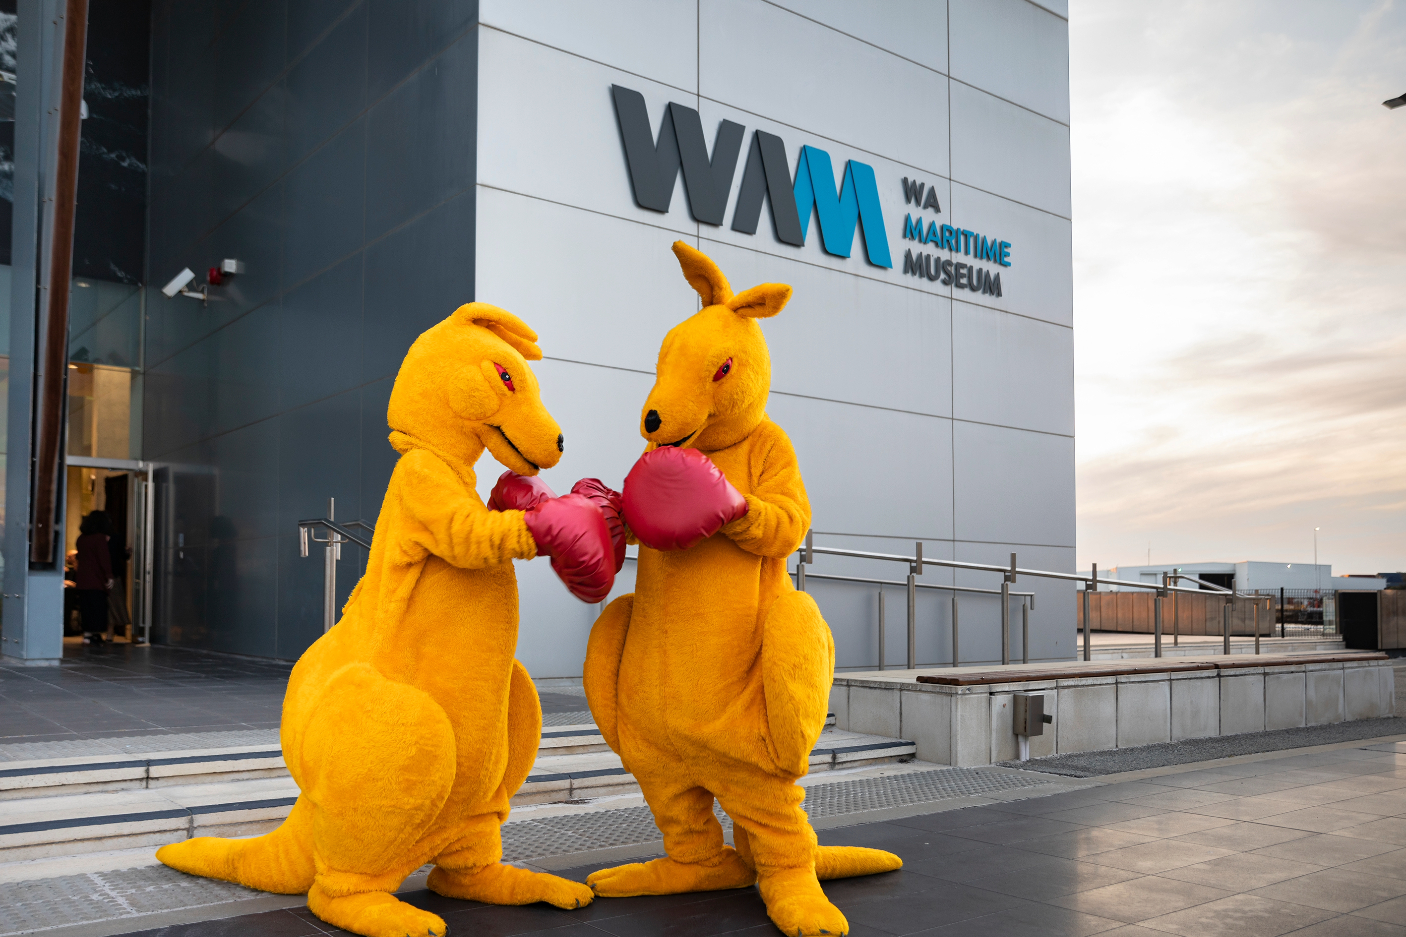 Image outside the WA Maritime Museum with two yellow boxing kangaroos in front.